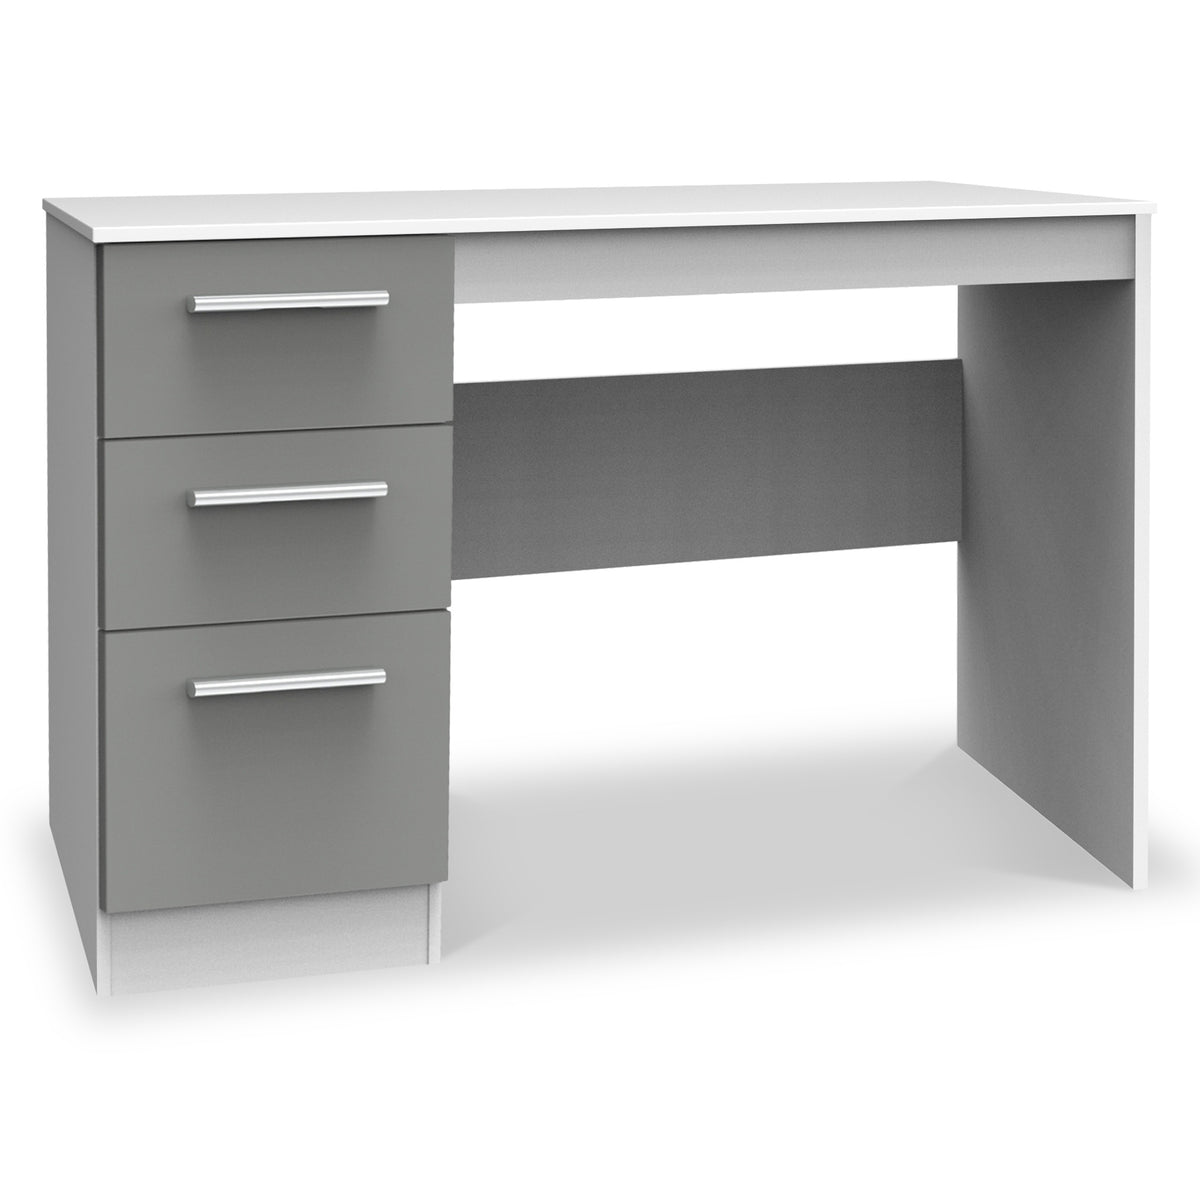 Blakely Grey and White 3 Drawer Storage Desk from roseland